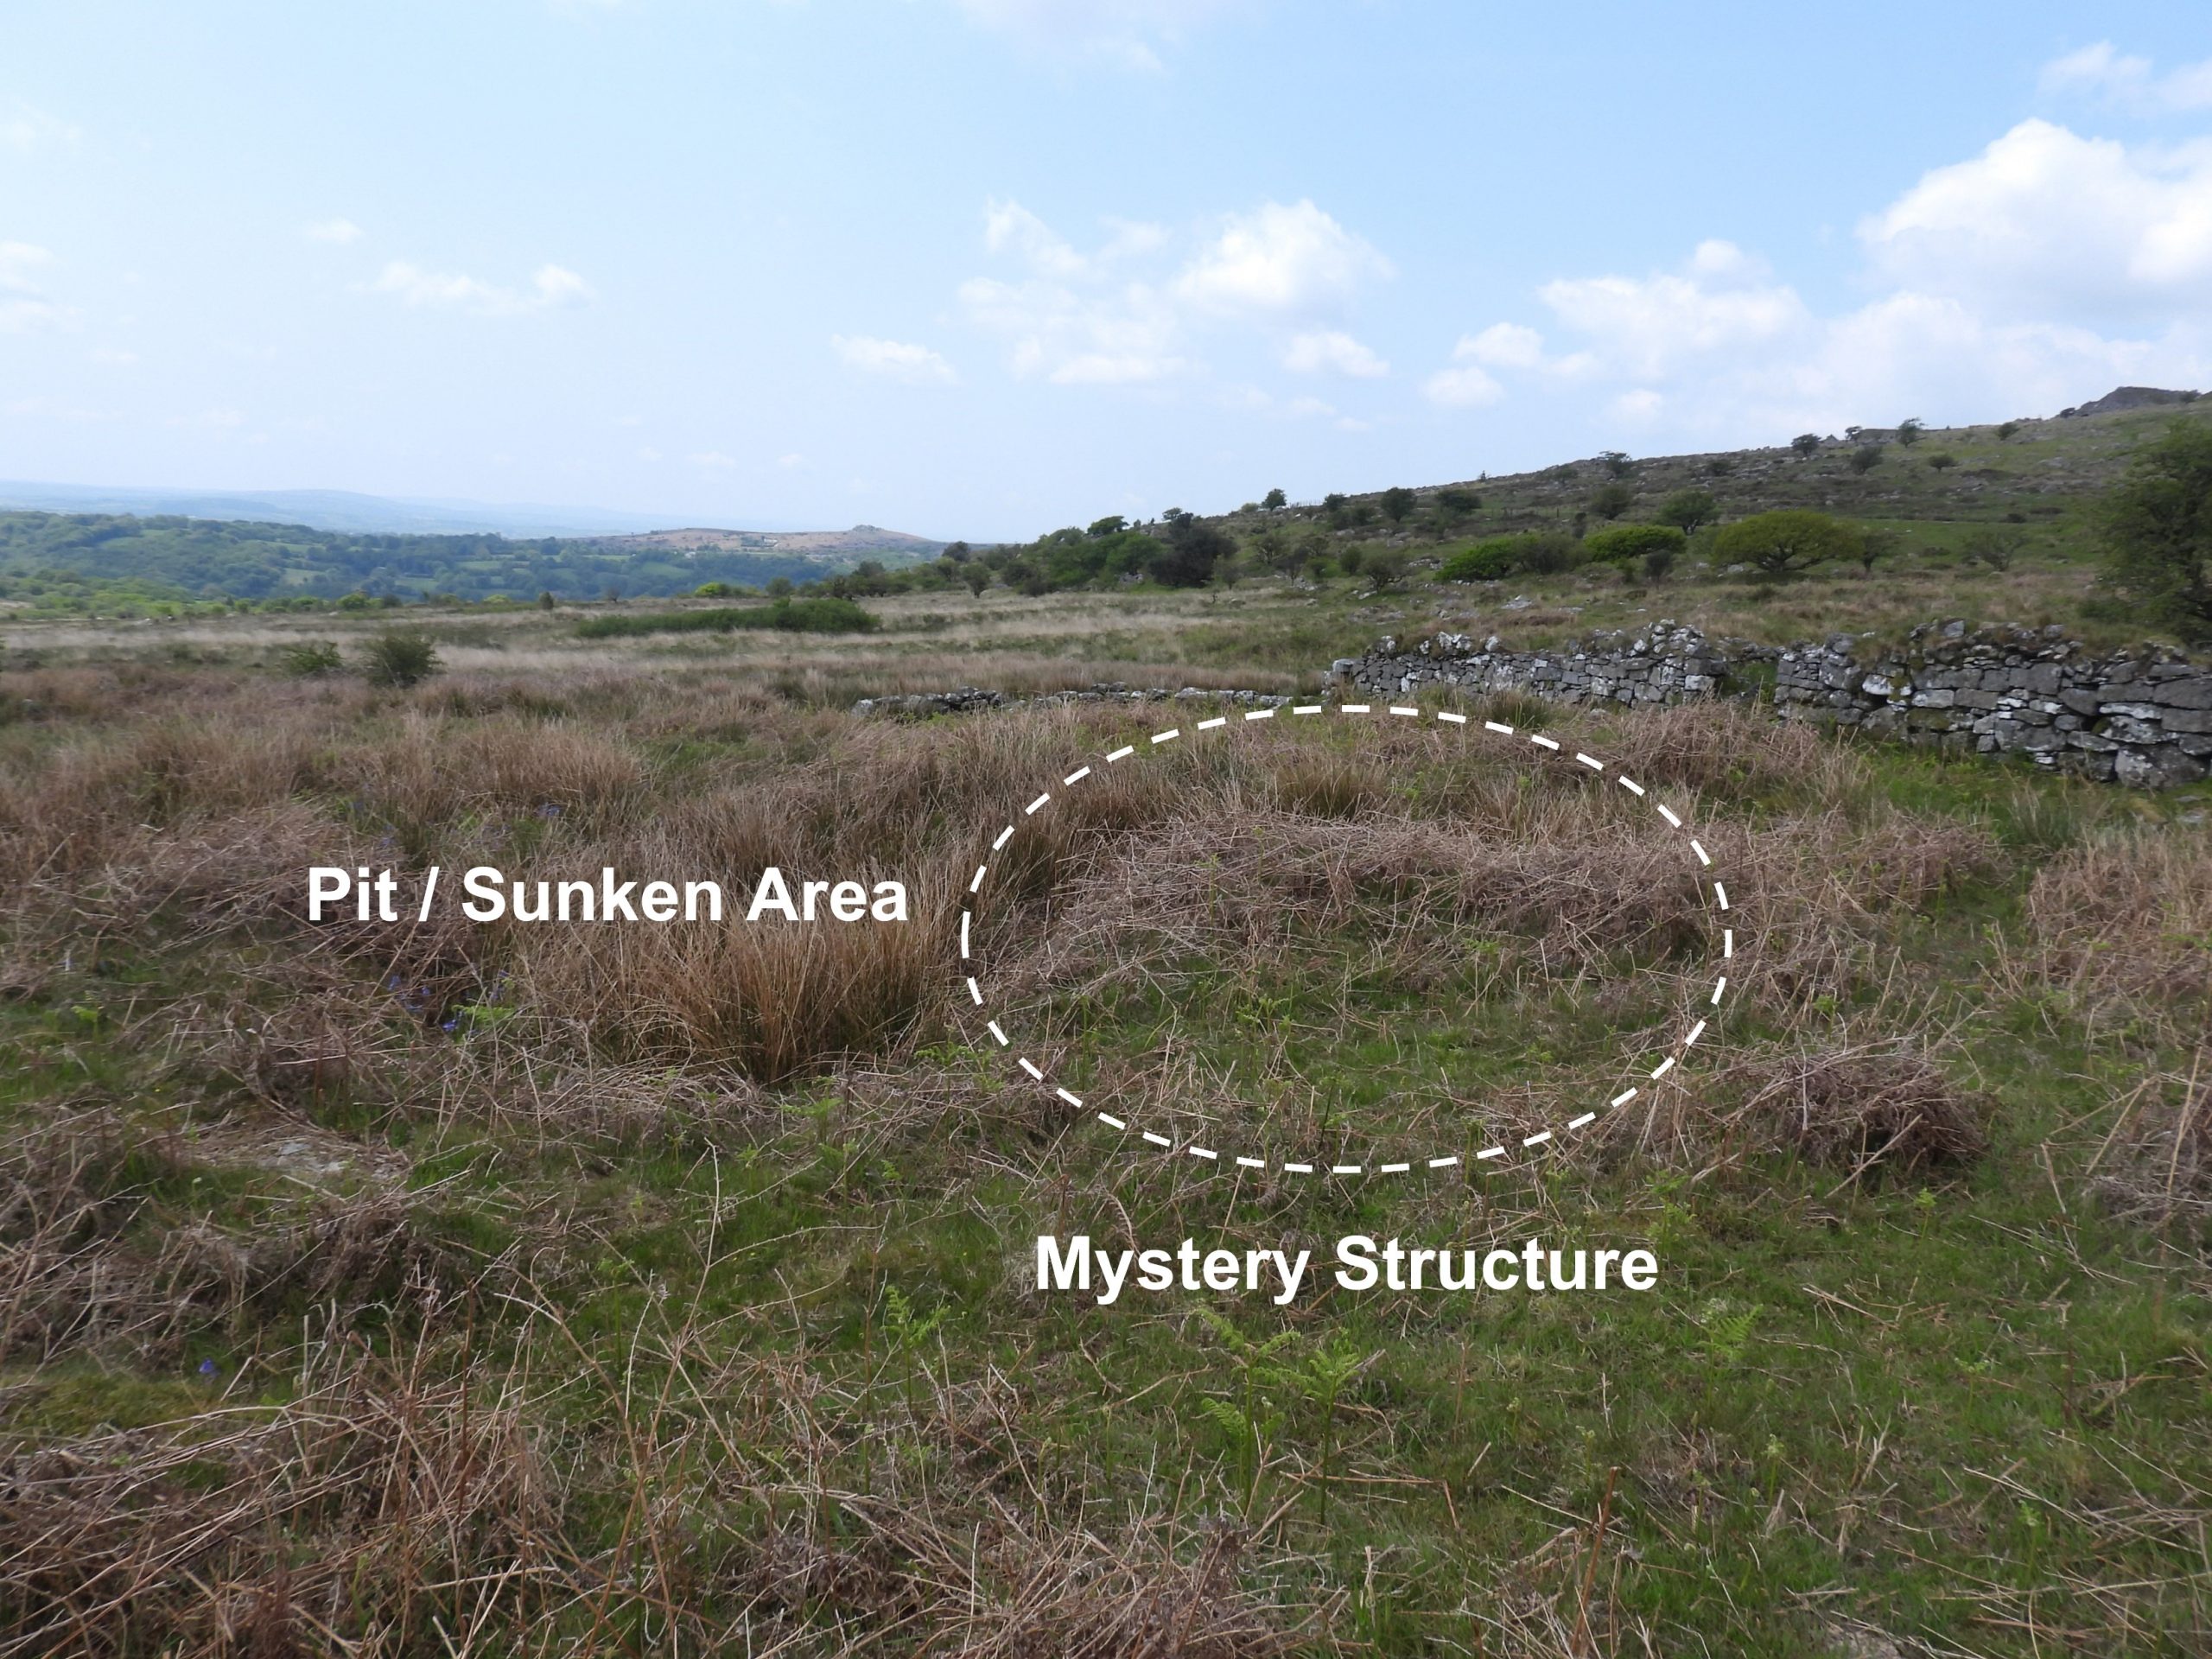 14. Mystery Structure